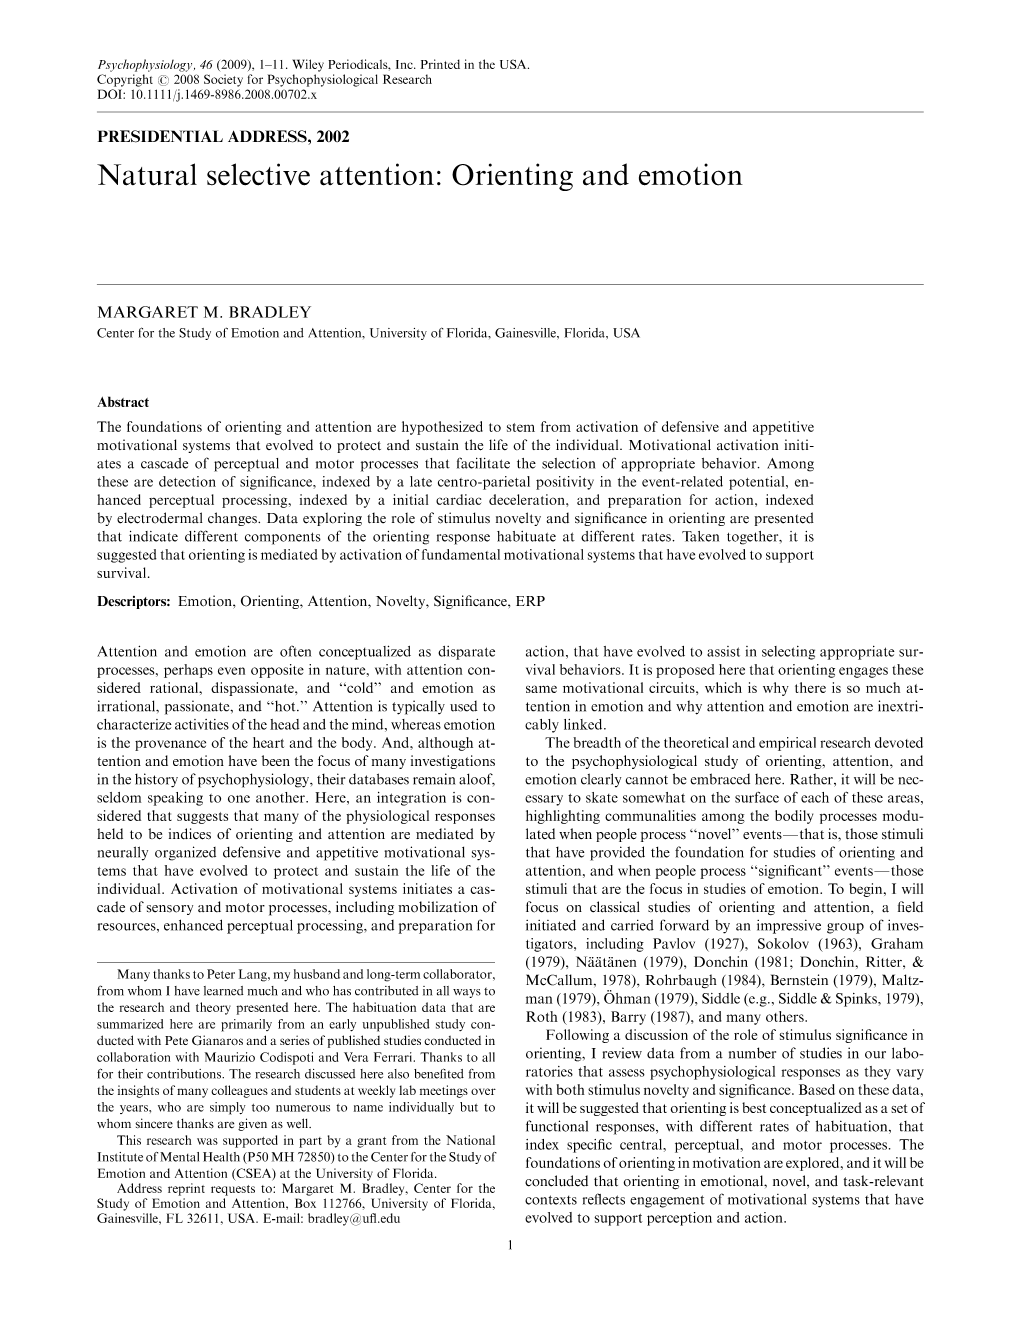 Natural Selective Attention: Orienting and Emotion